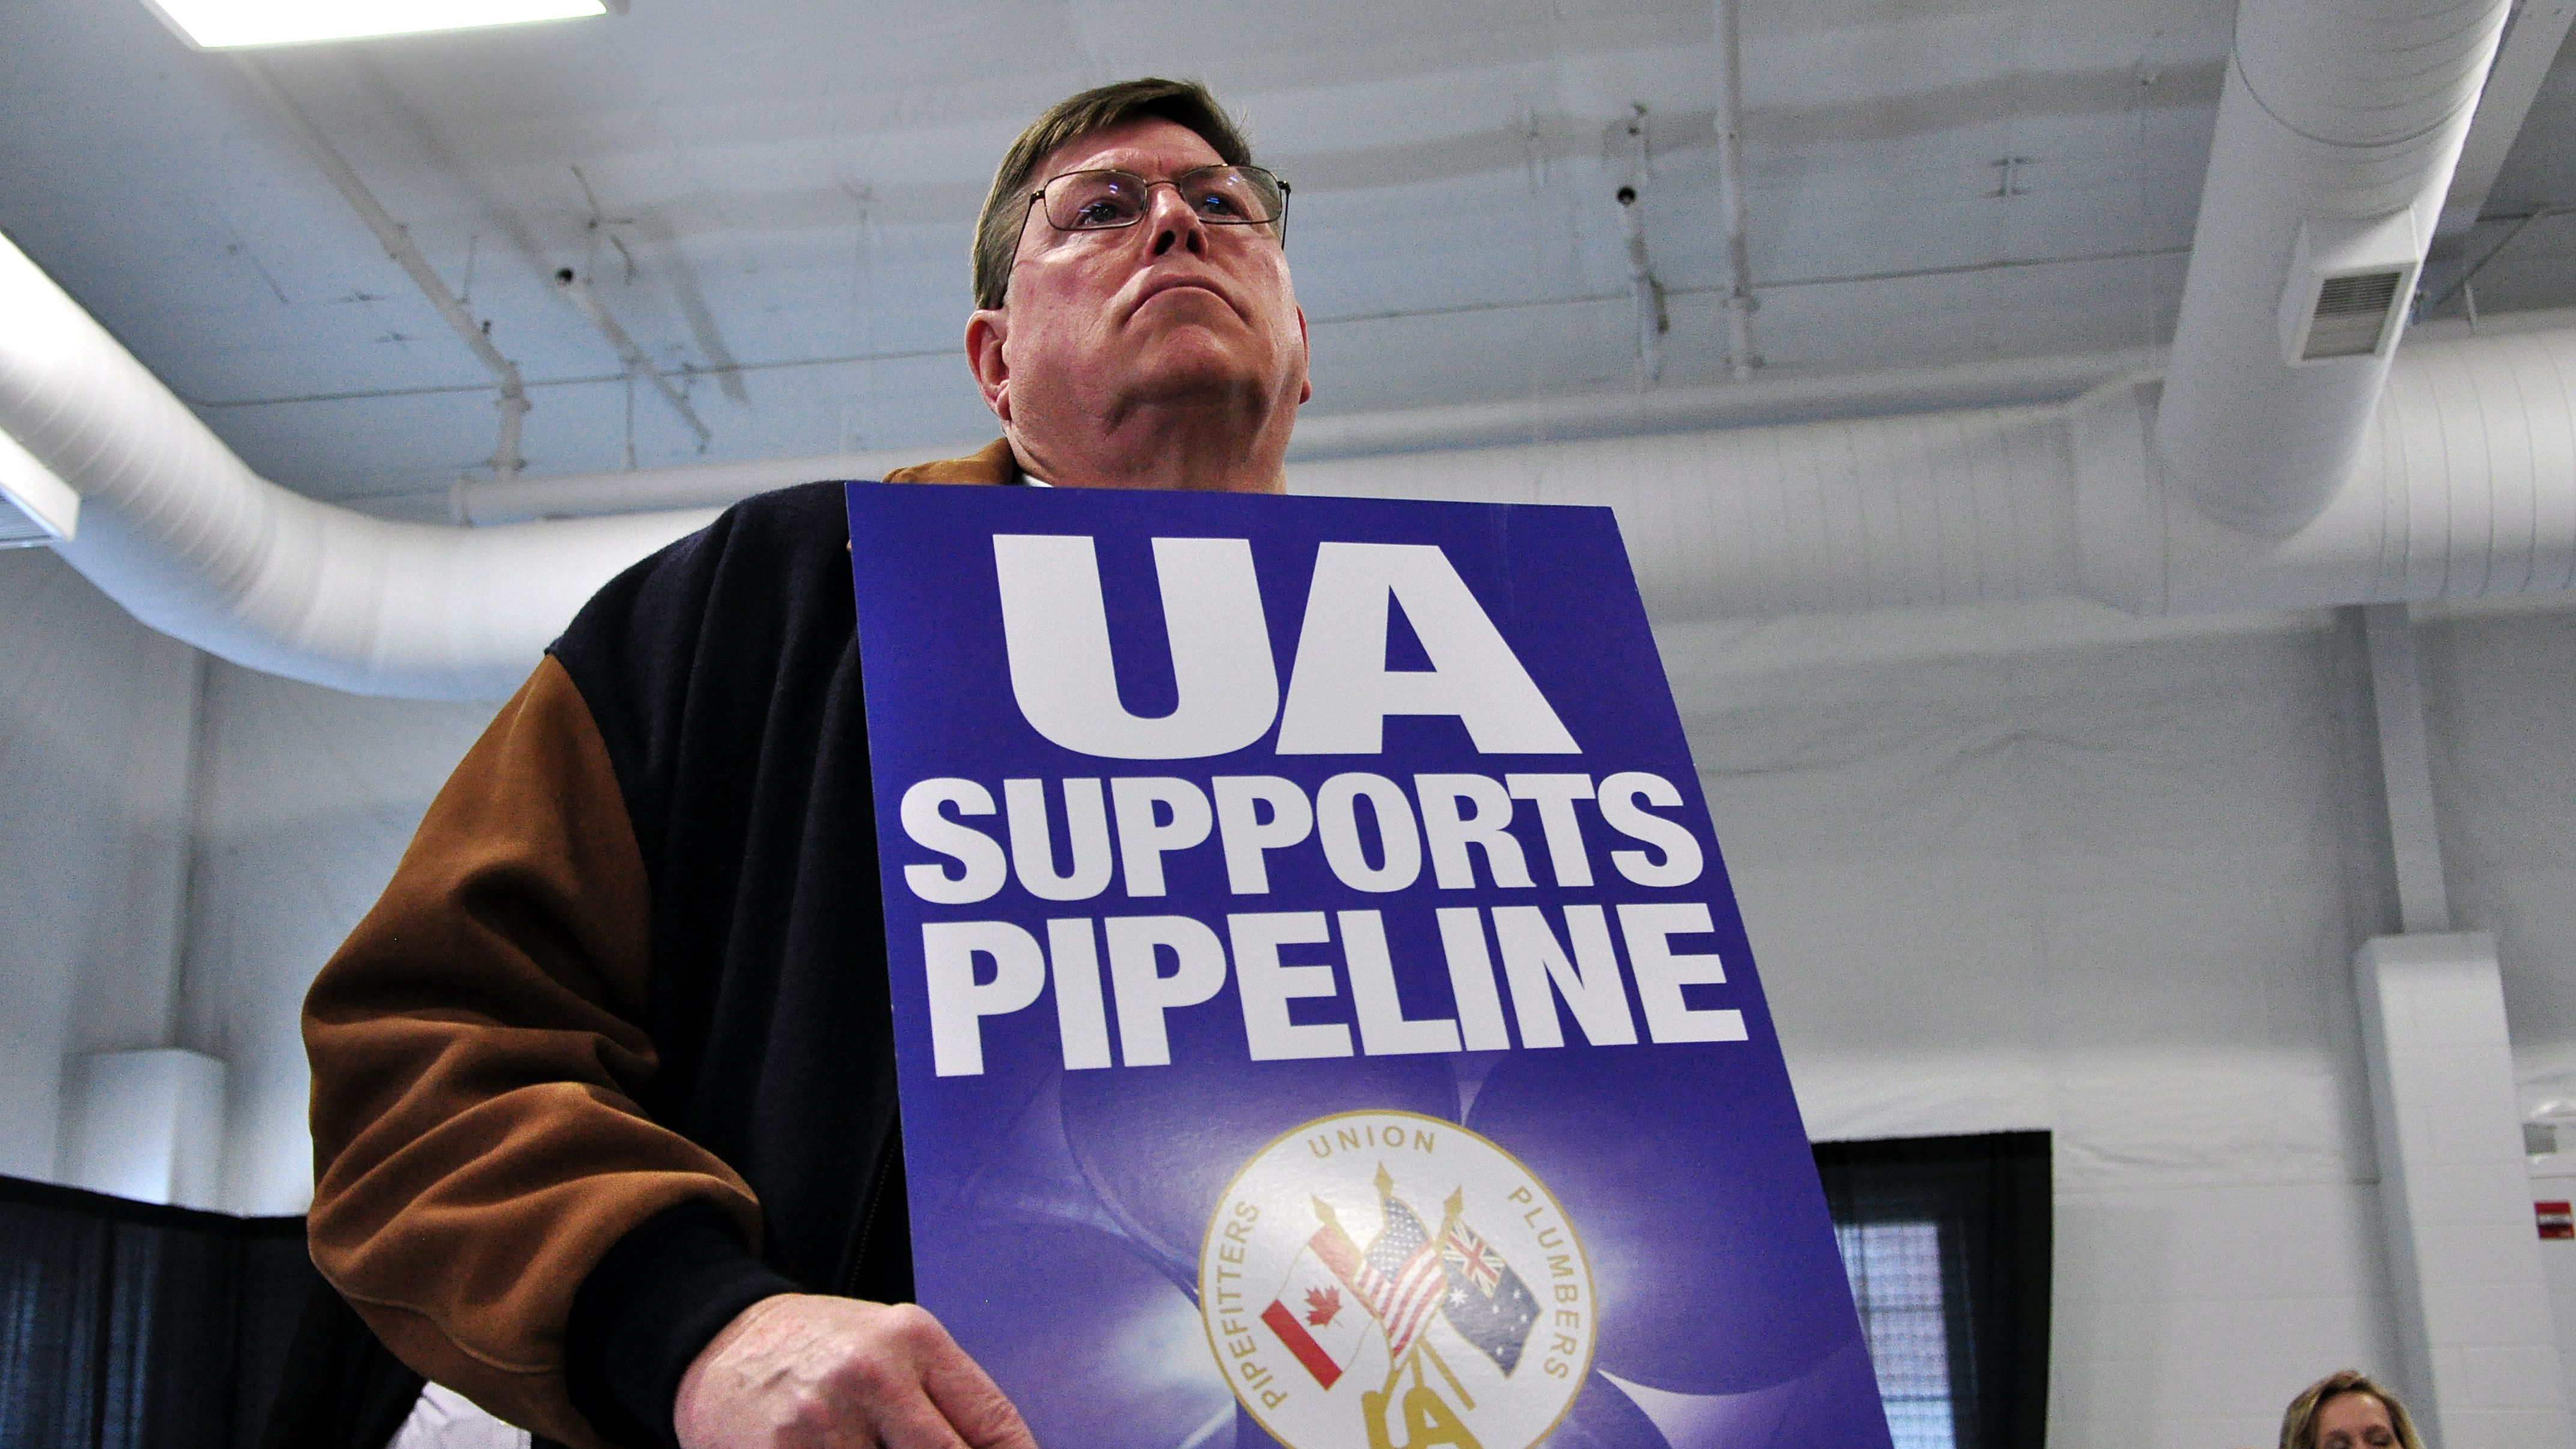 Union members clashed with Keystone opponents at a pipeline hearing in April 2013, in Grand Island, Nebraska.
